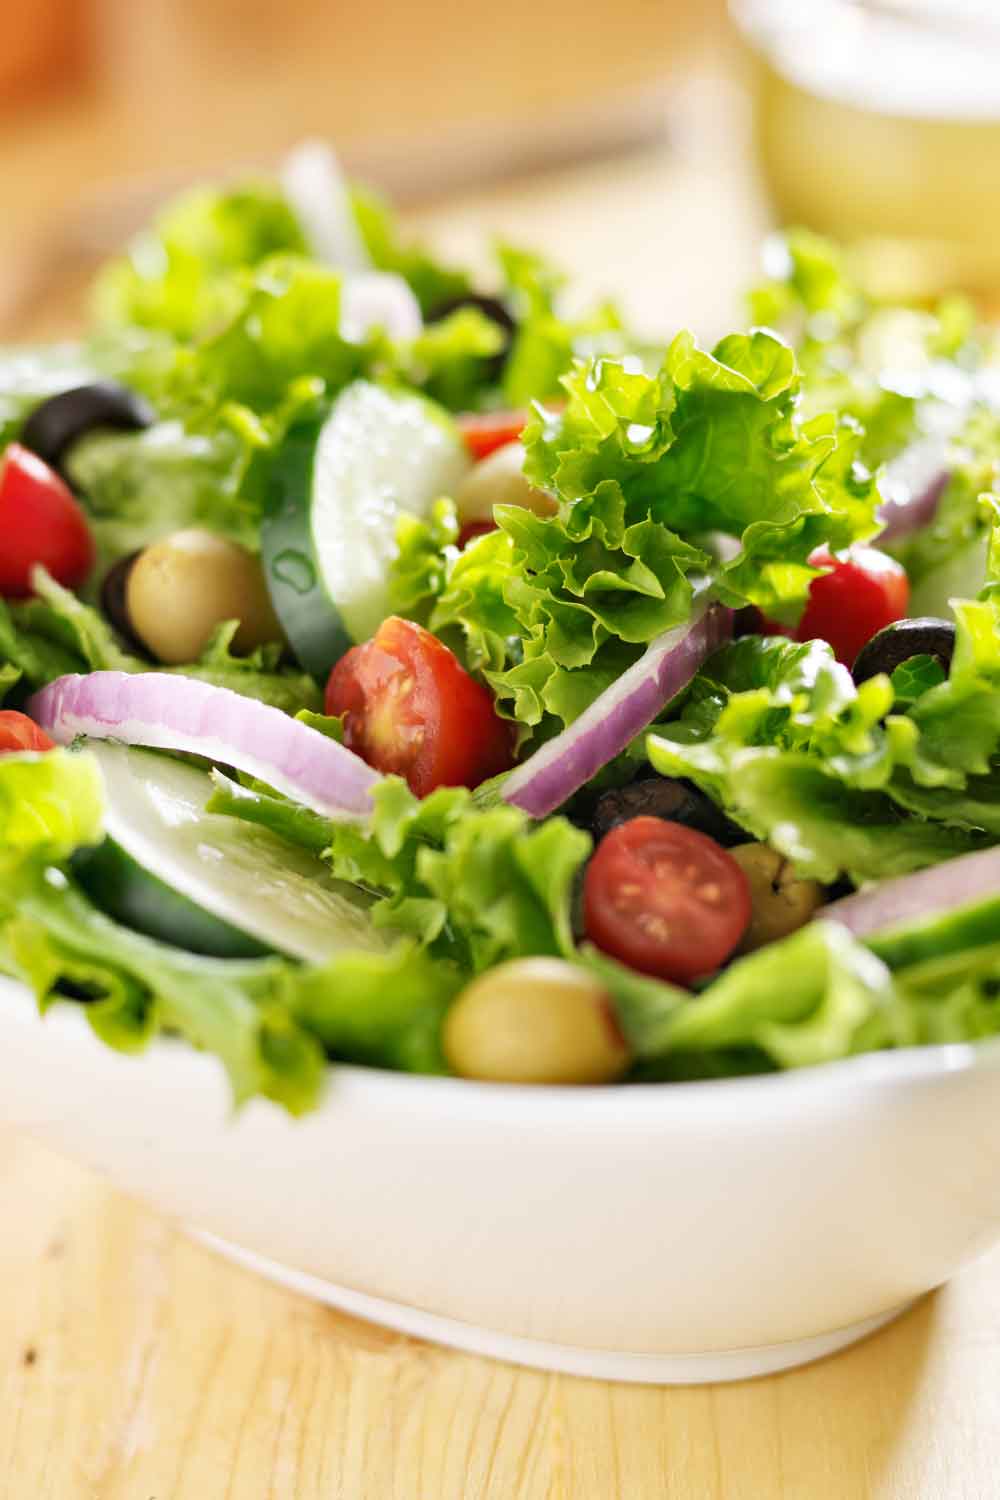 Incorporating Leafy Greens into Your Diet